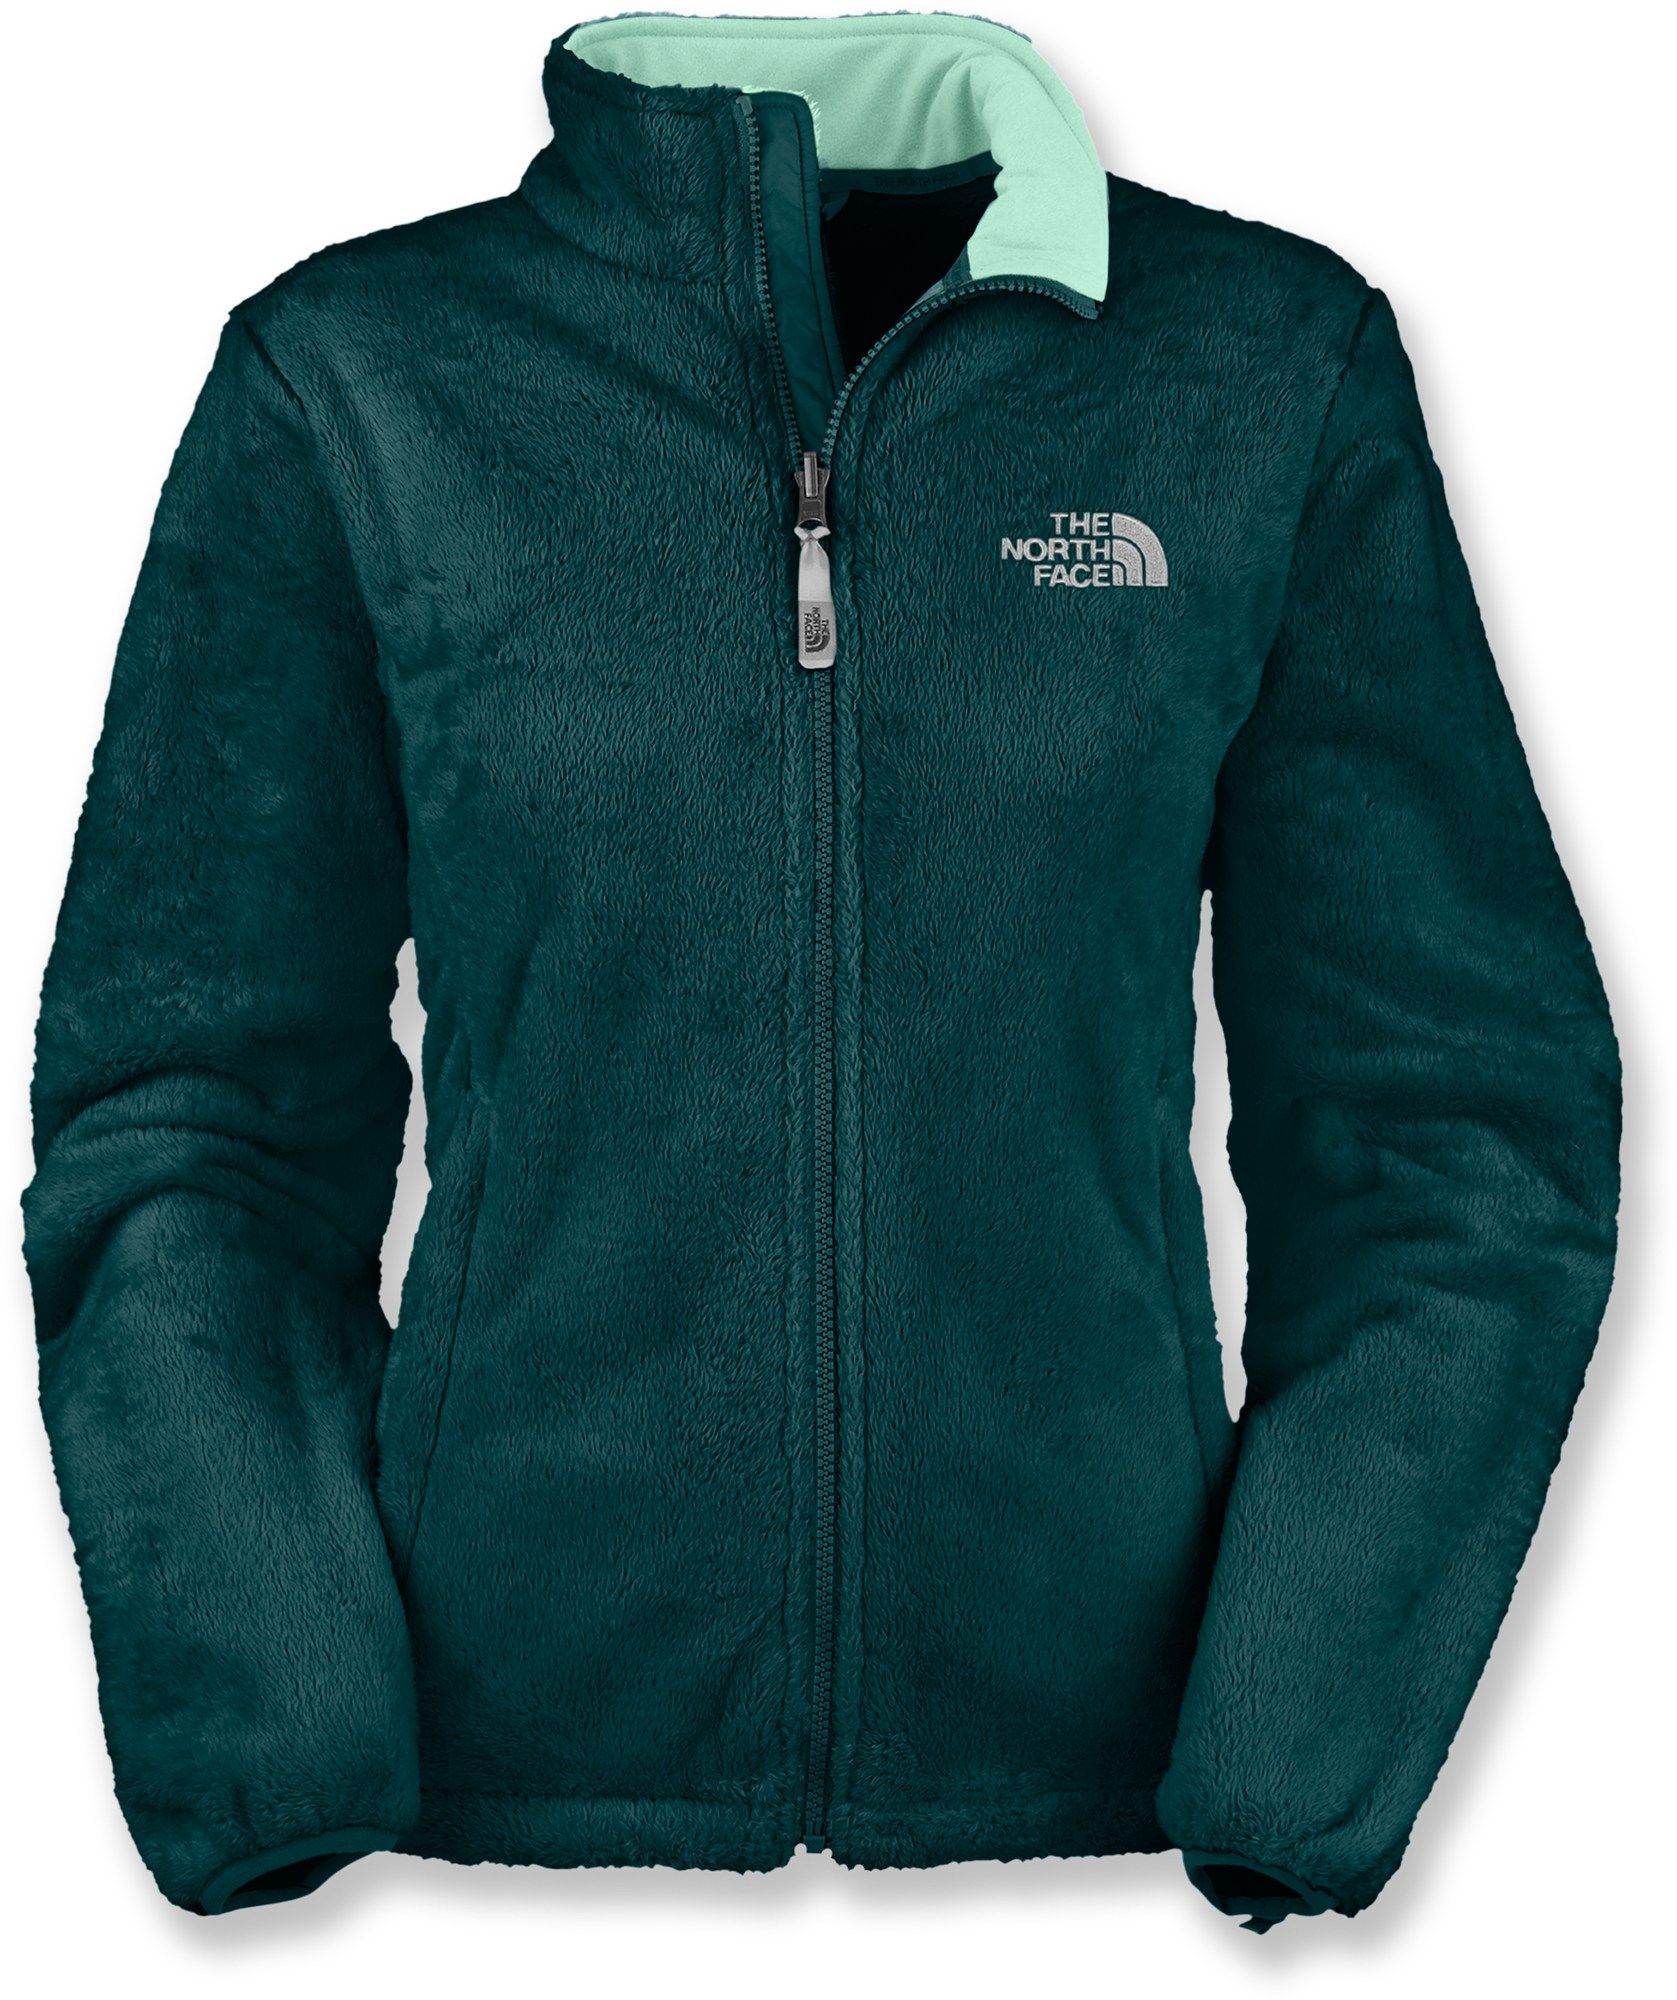 The North Face Osito Fleece Jacket – Women's. I've never really been one